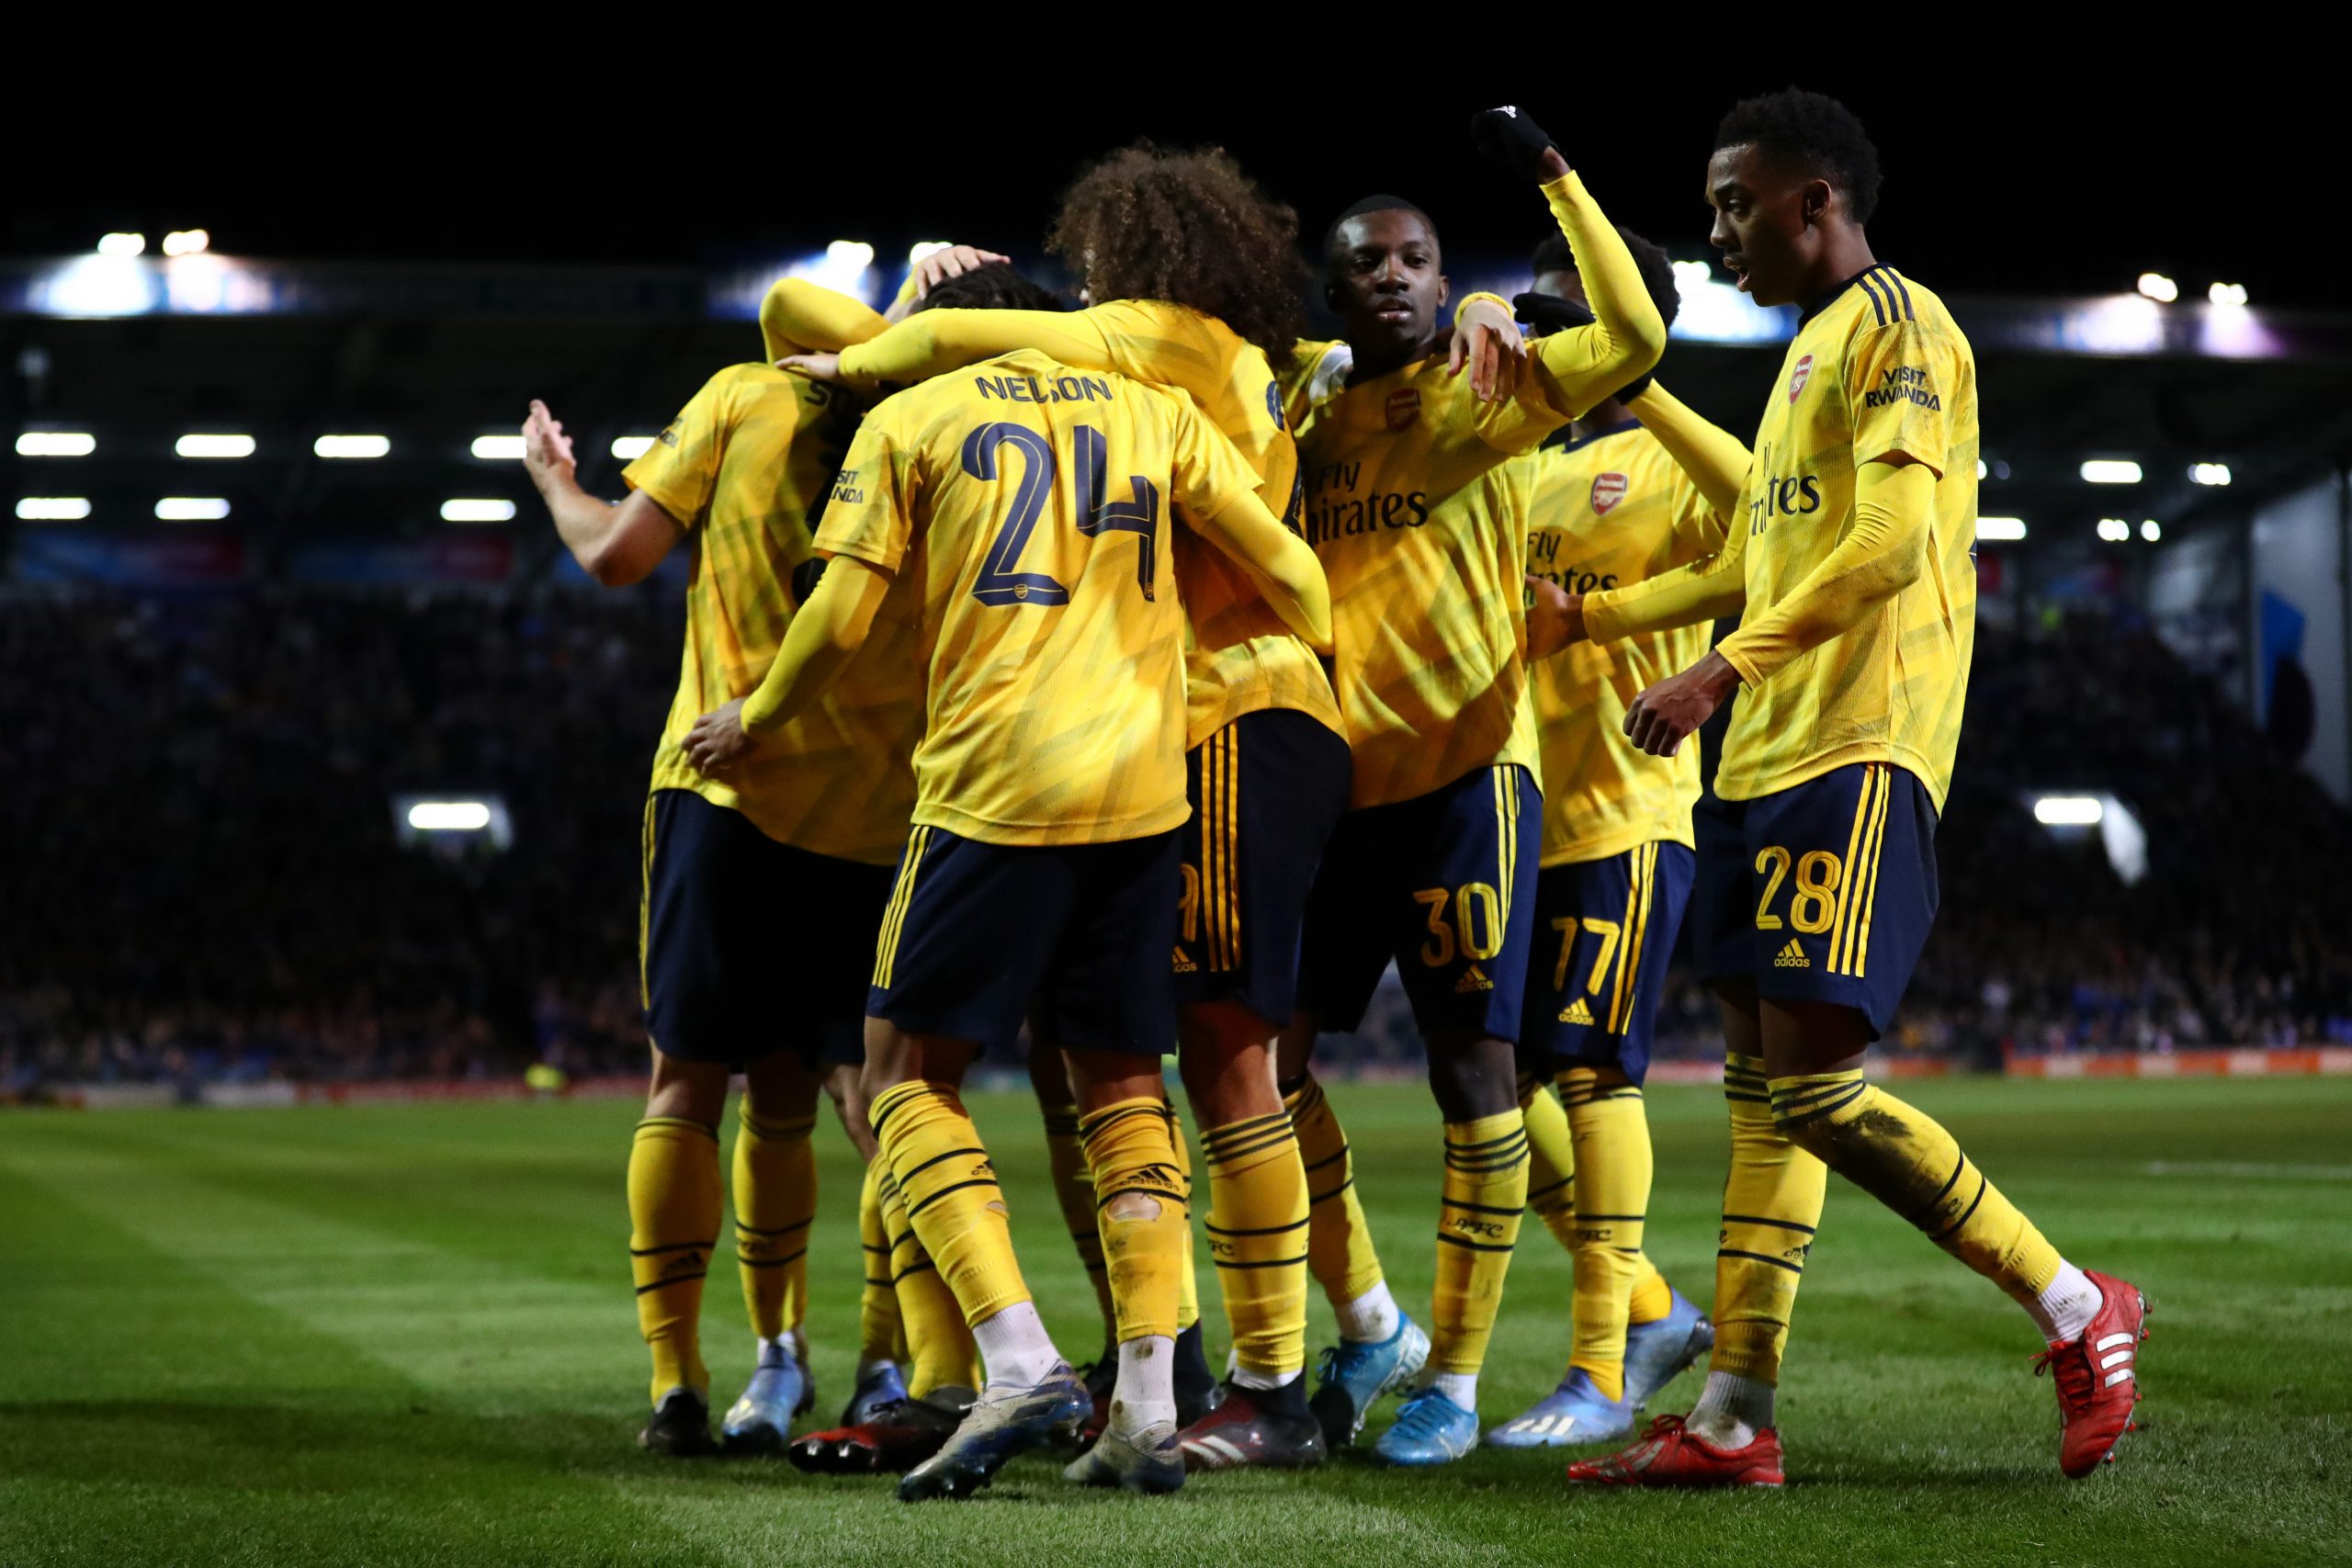 Arsenal to wear full yellow kit for 